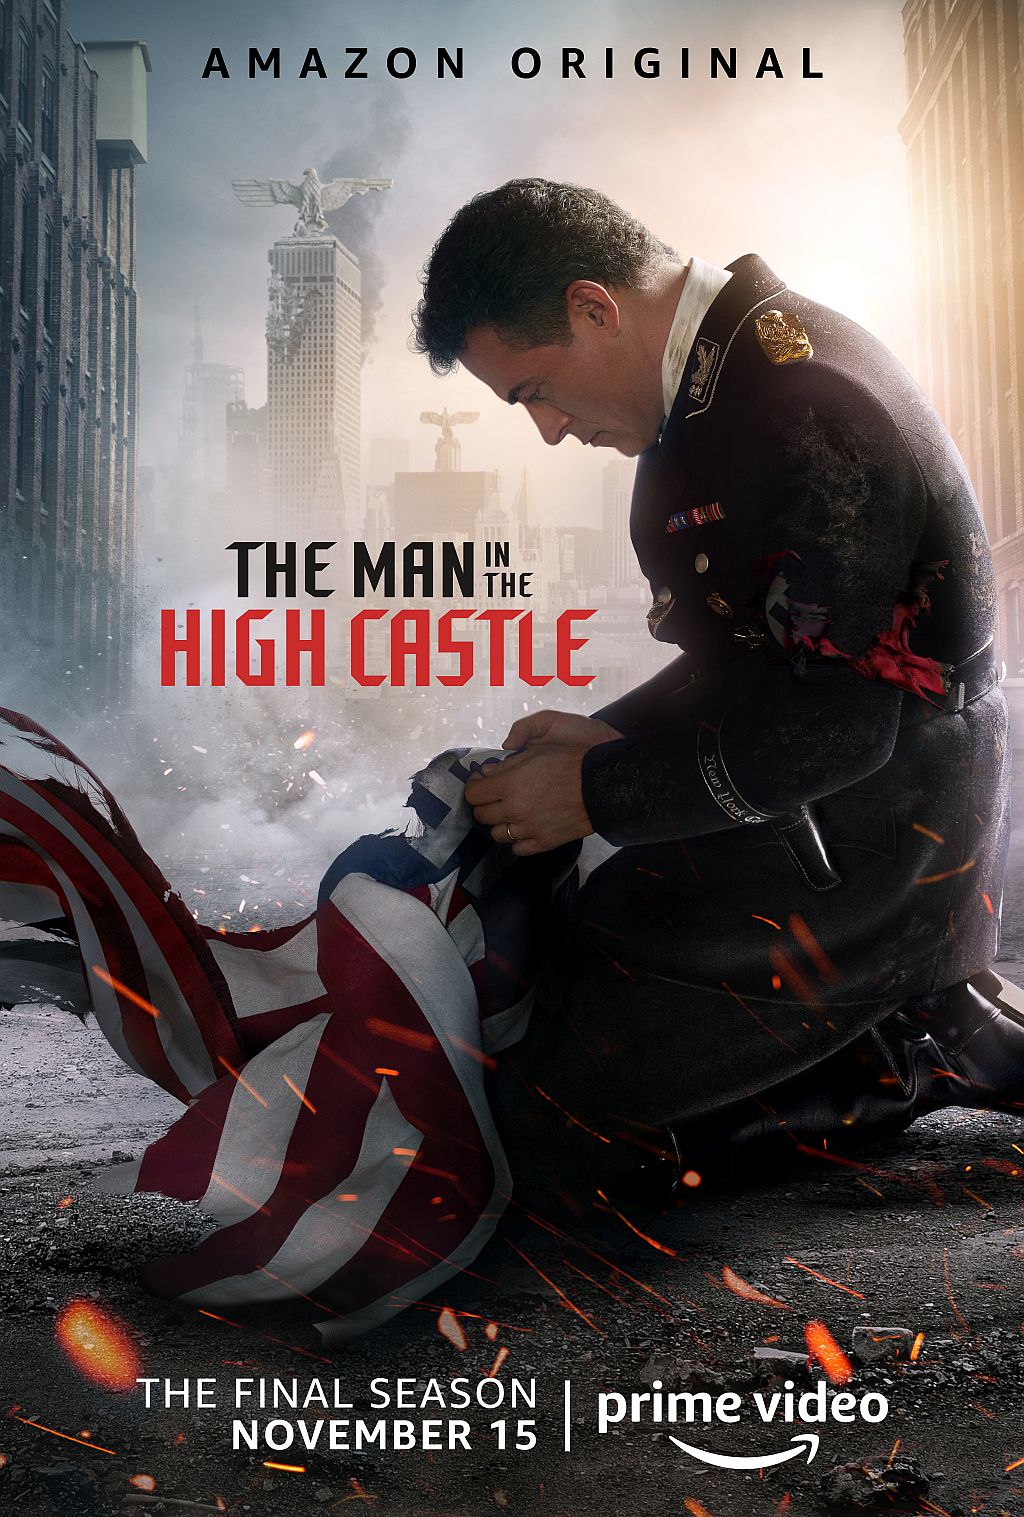 The Man In The High Castle (2015), Seasons 1-4 on Amazon Prime Video